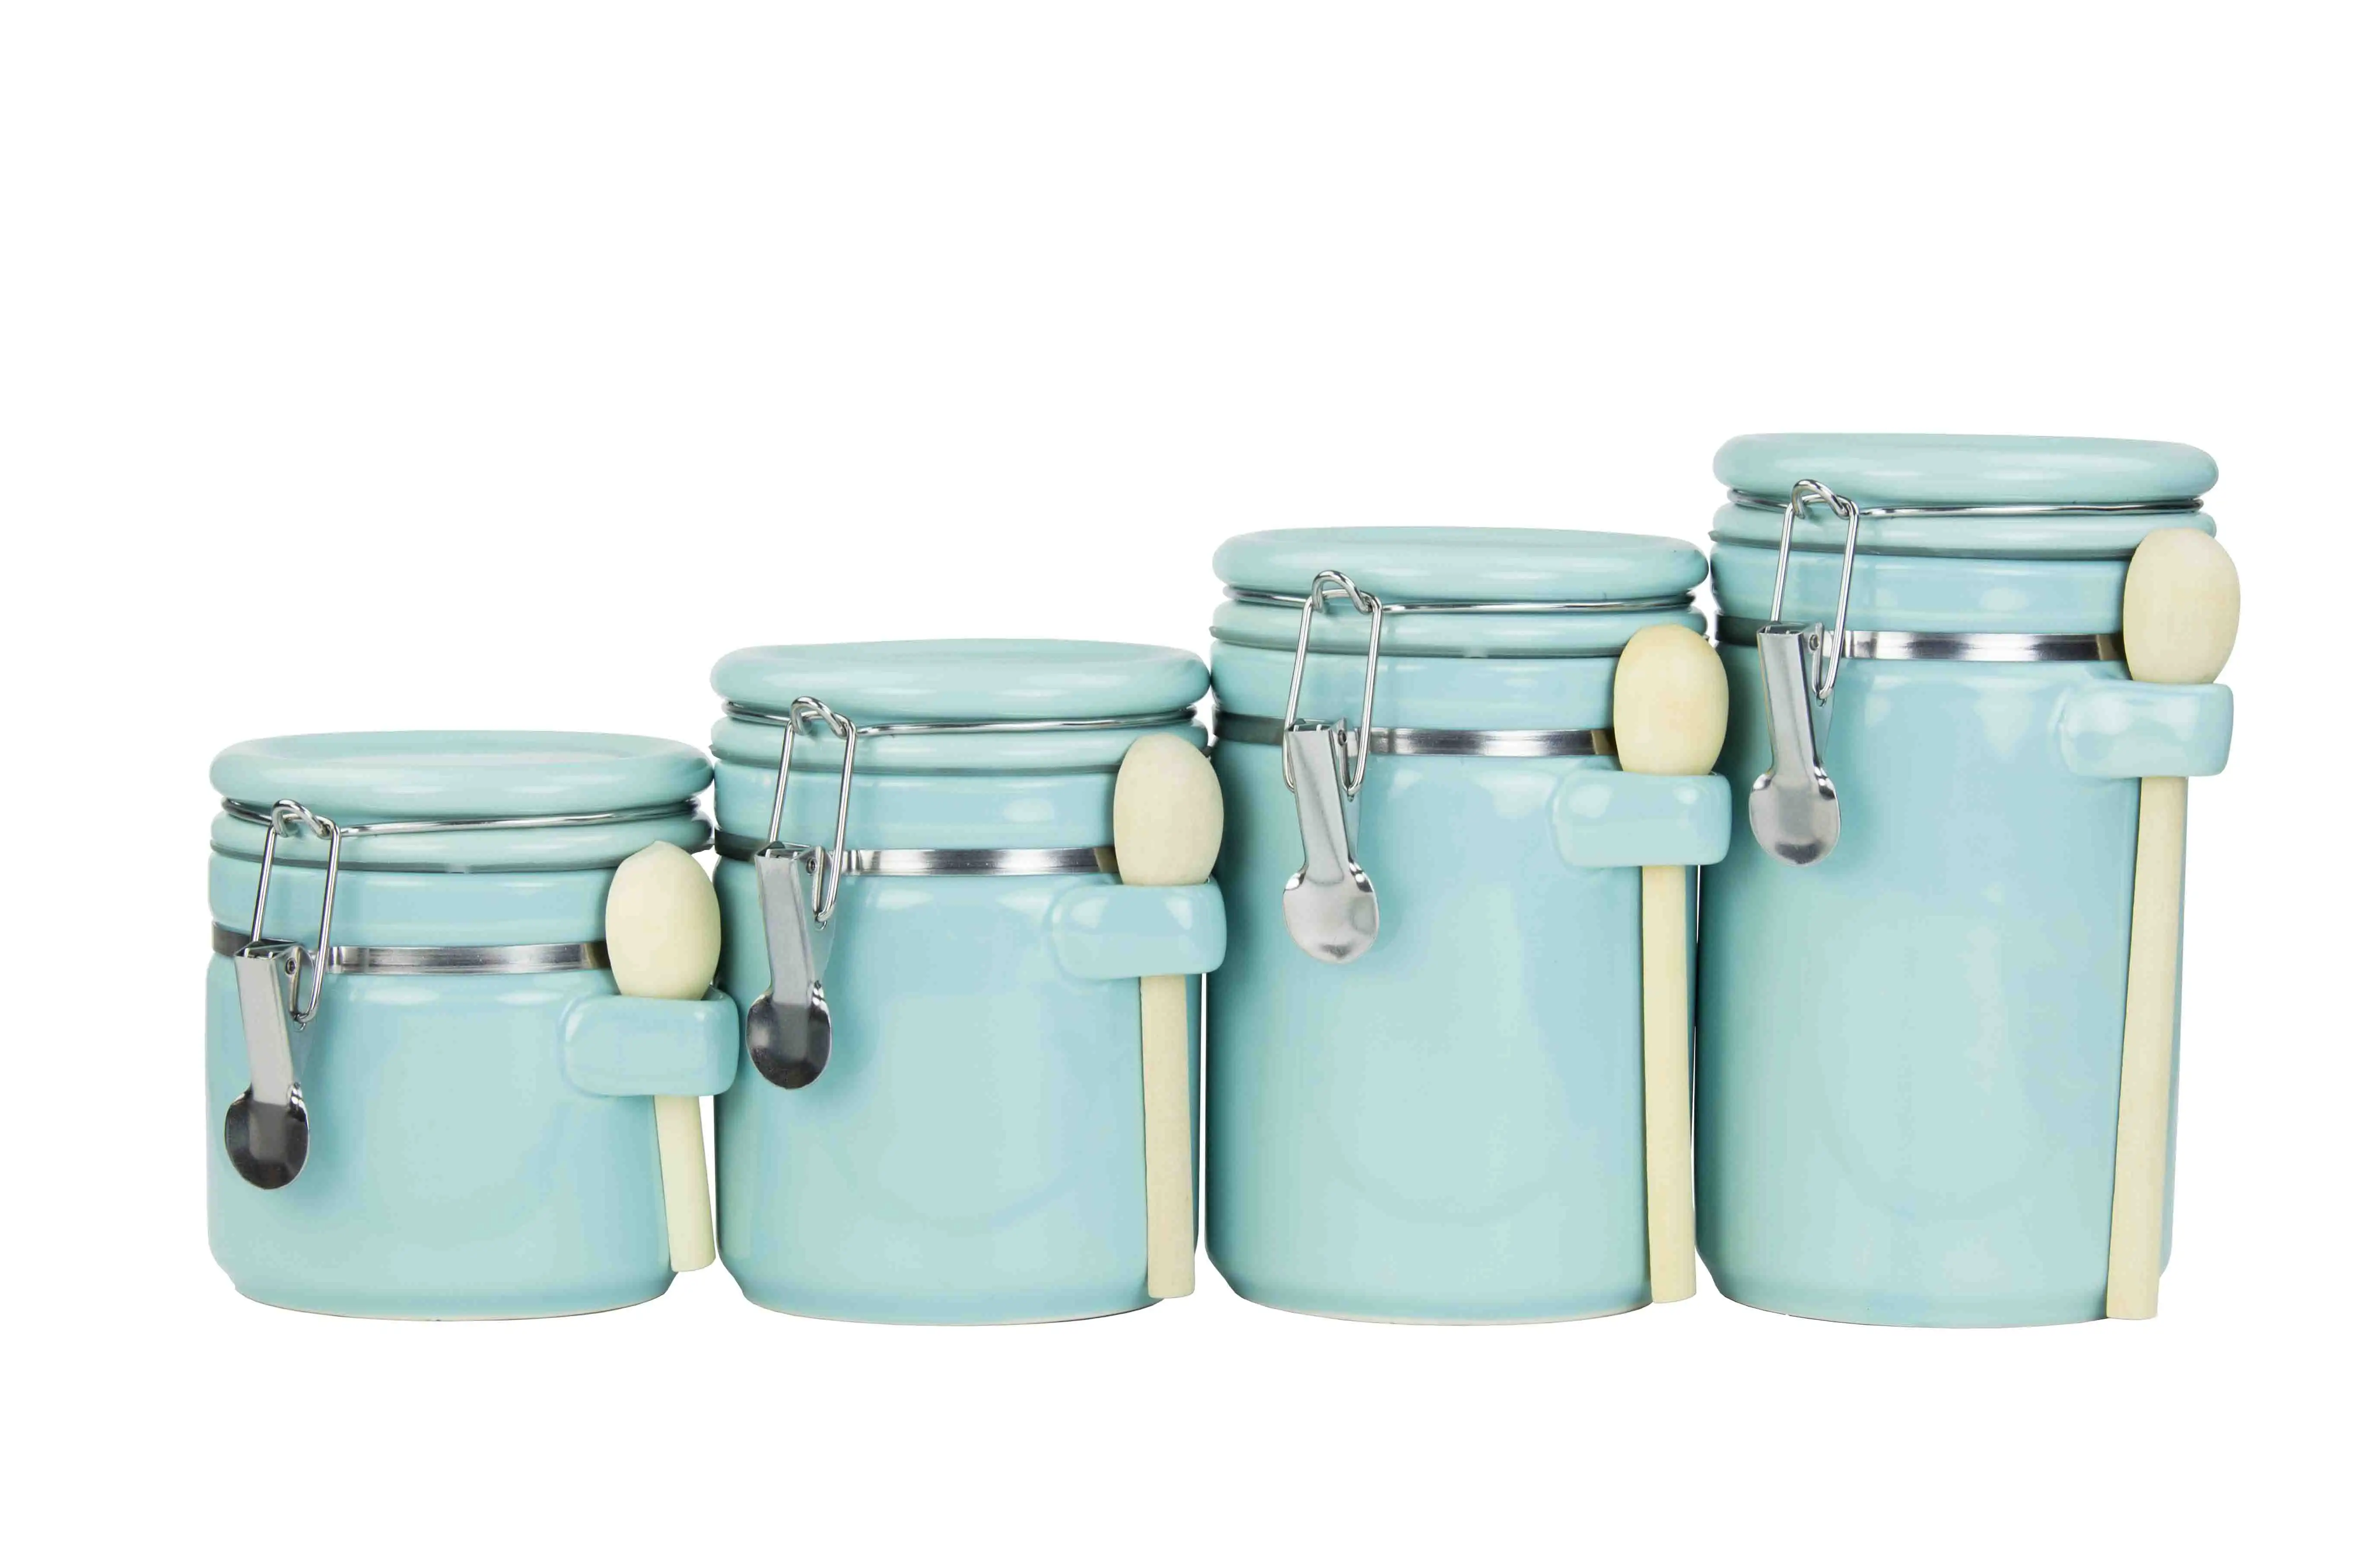 

Home Basics 4 Piece Ceramic Canisters with Easy Open Air-Tight Clamp Top Lid and Wooden Spoons, Turquoise